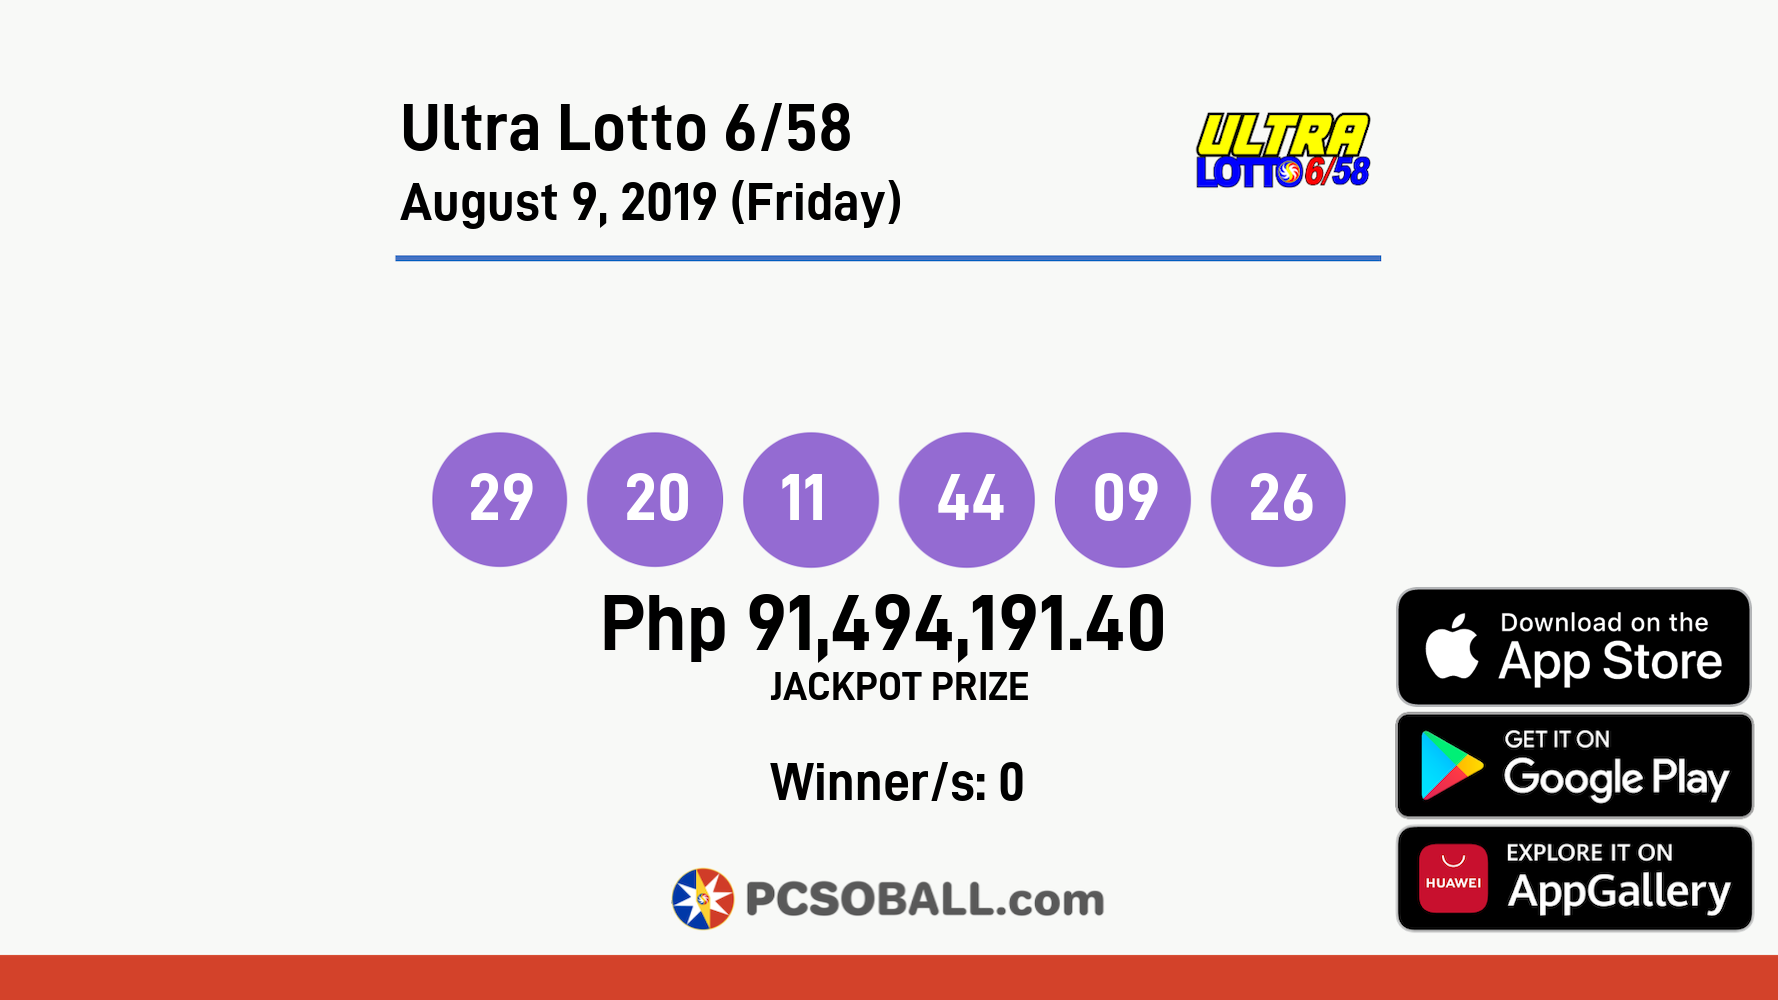 Ultra Lotto 6/58 August 9, 2019 (Friday) Result